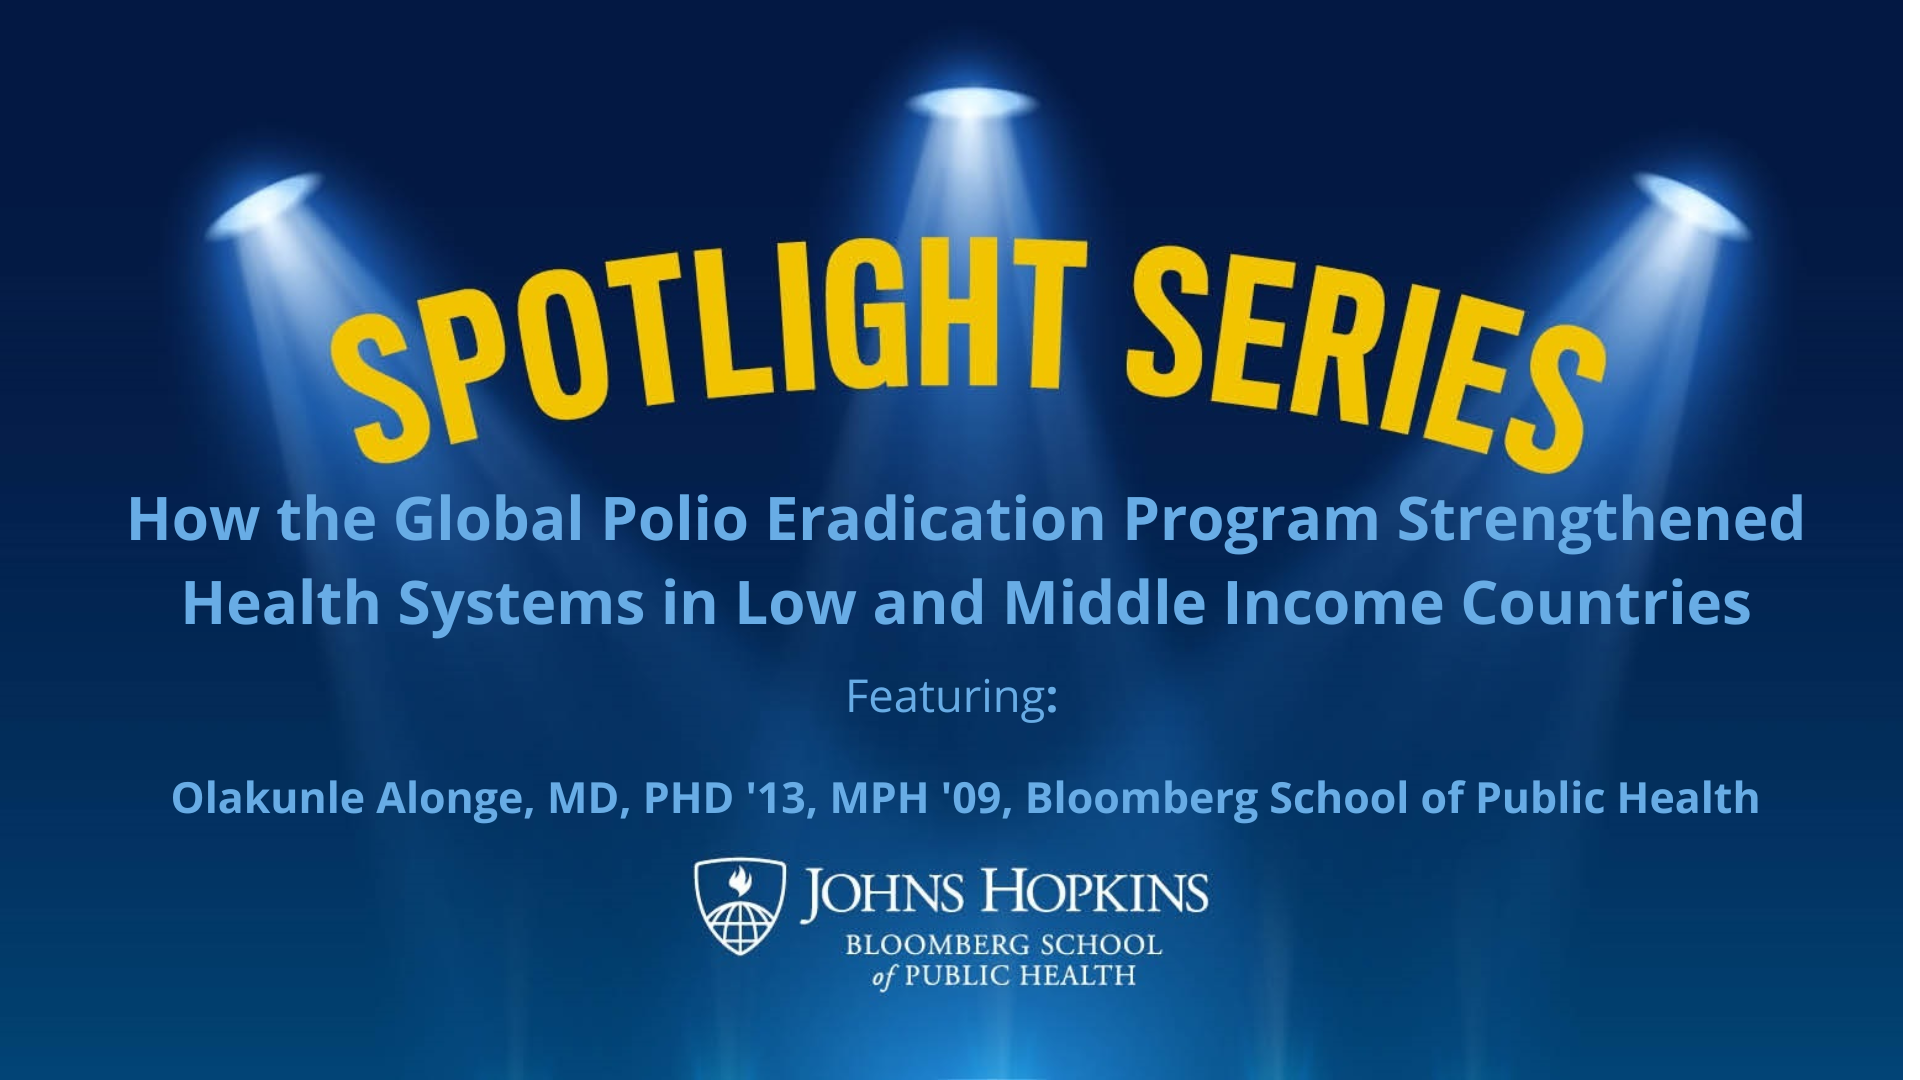 How the Global Polio Eradication Program Strengthened Health Systems in Low and Middle Income Countries